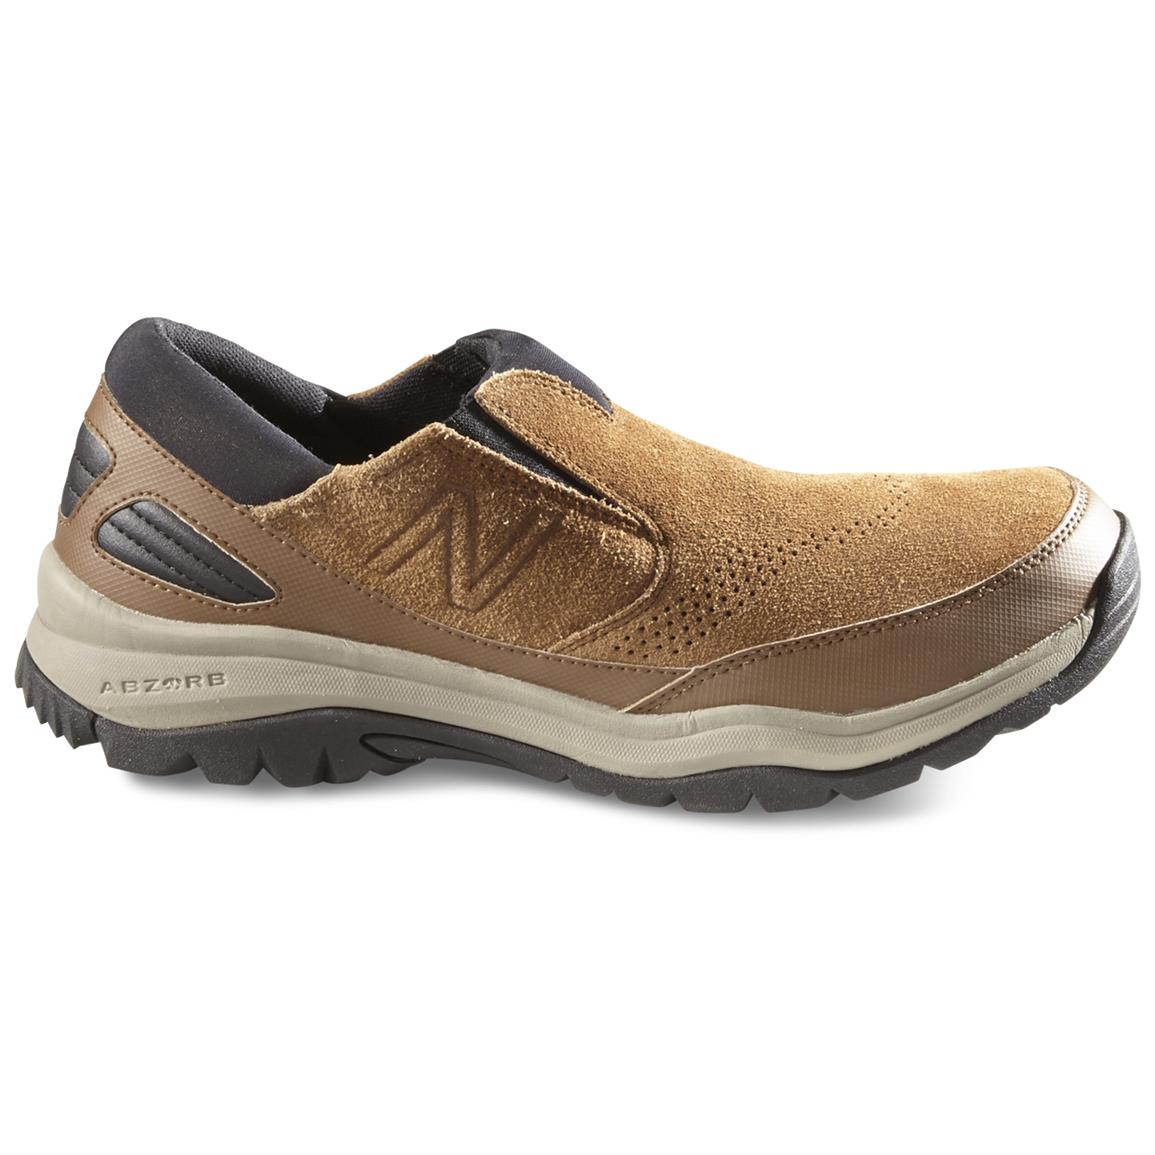 New Balance Men's 770 Trail Walking Slip-On Shoes - 666915, Casual ...